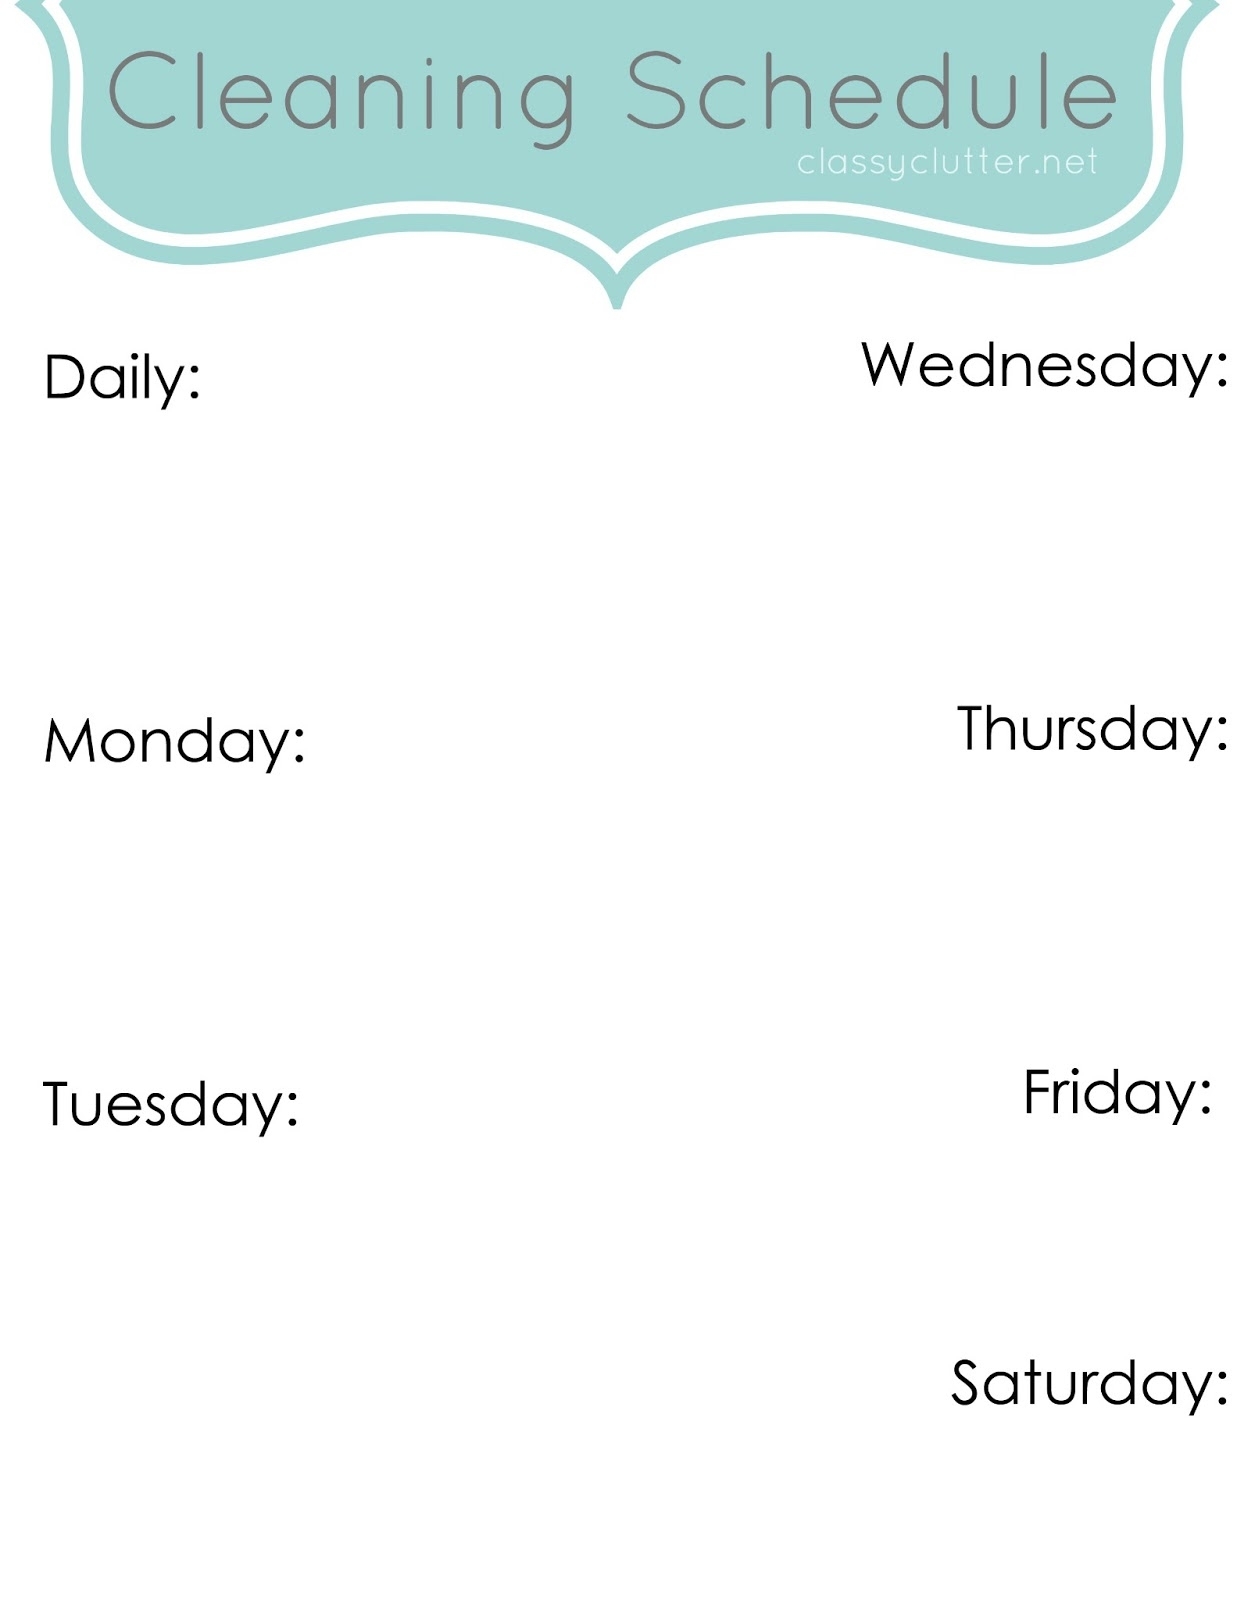 Weekly Cleaning Schedule: Improve Your Cleaning Habits - Classy Clutter pertaining to Monday Through Friday Cleaning Schedule